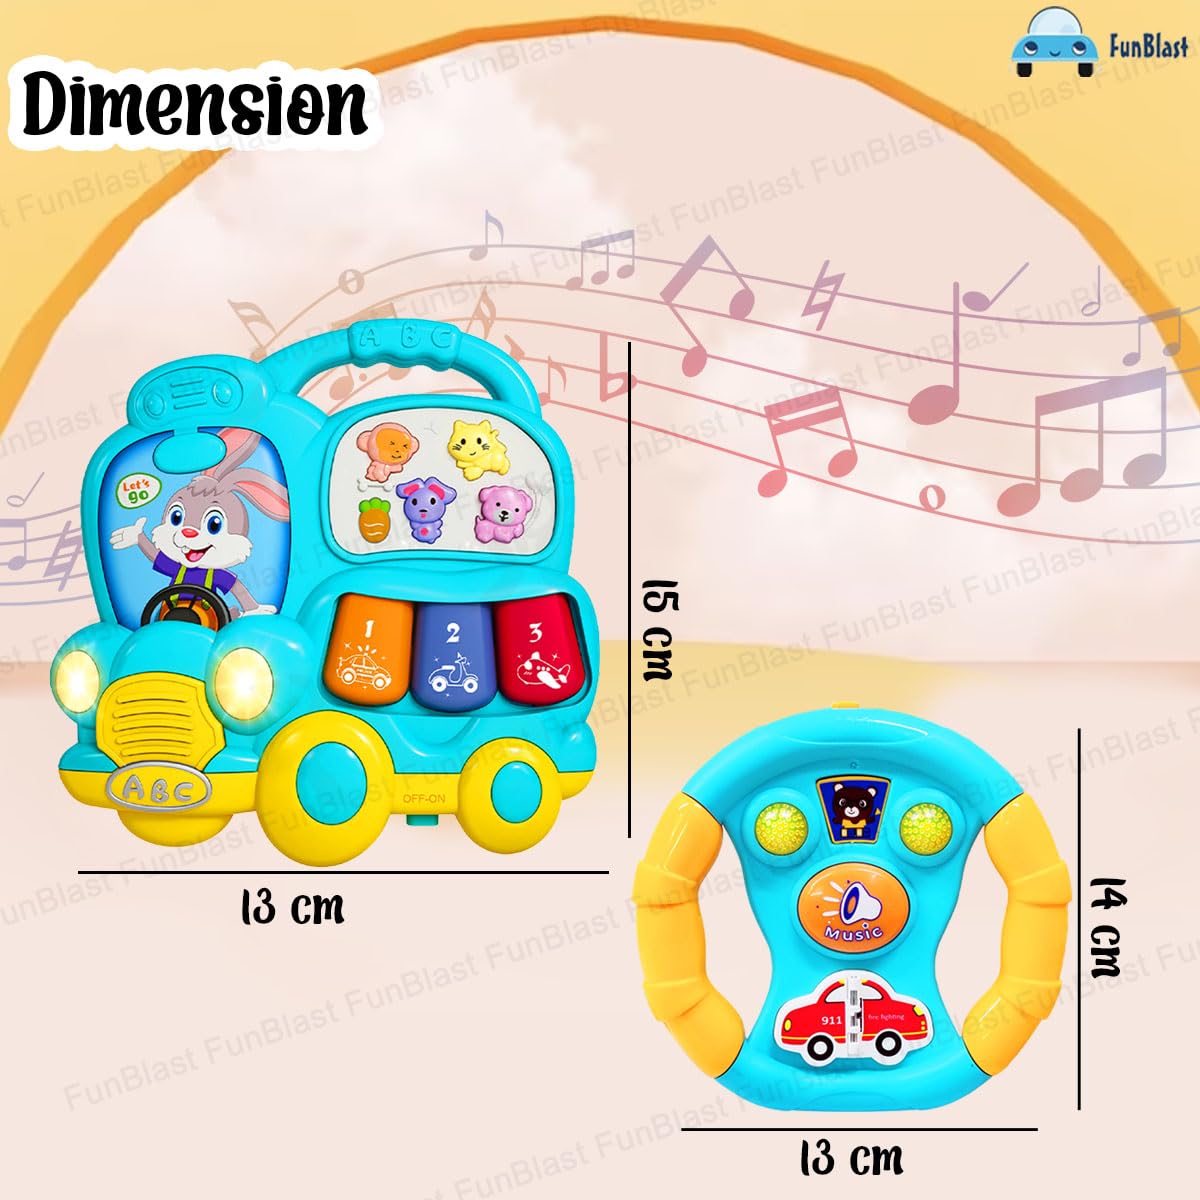 FunBlast Musical Toys for Kids, Toy Piano and Steering Wheel Toys for Kids, Musical Instrument Toy, Baby Toy for 1+ Years Kid, Boy, Girl, Early Development Activity Toys for Babies